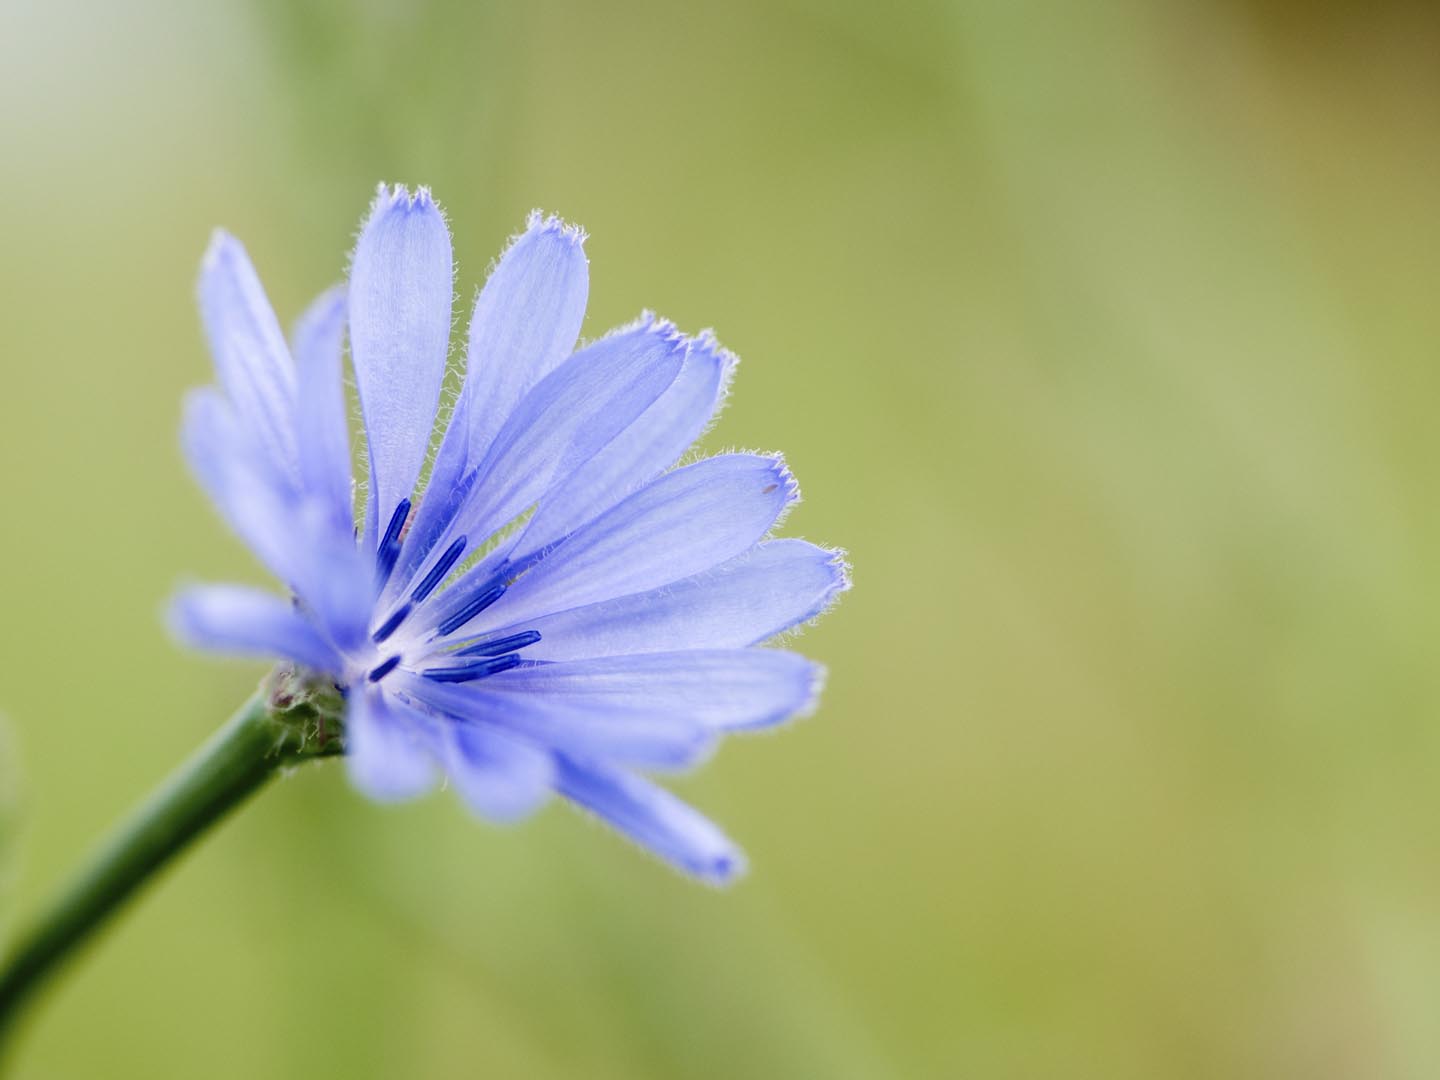 Is Chicory Good for You? - Ask Dr. Weil